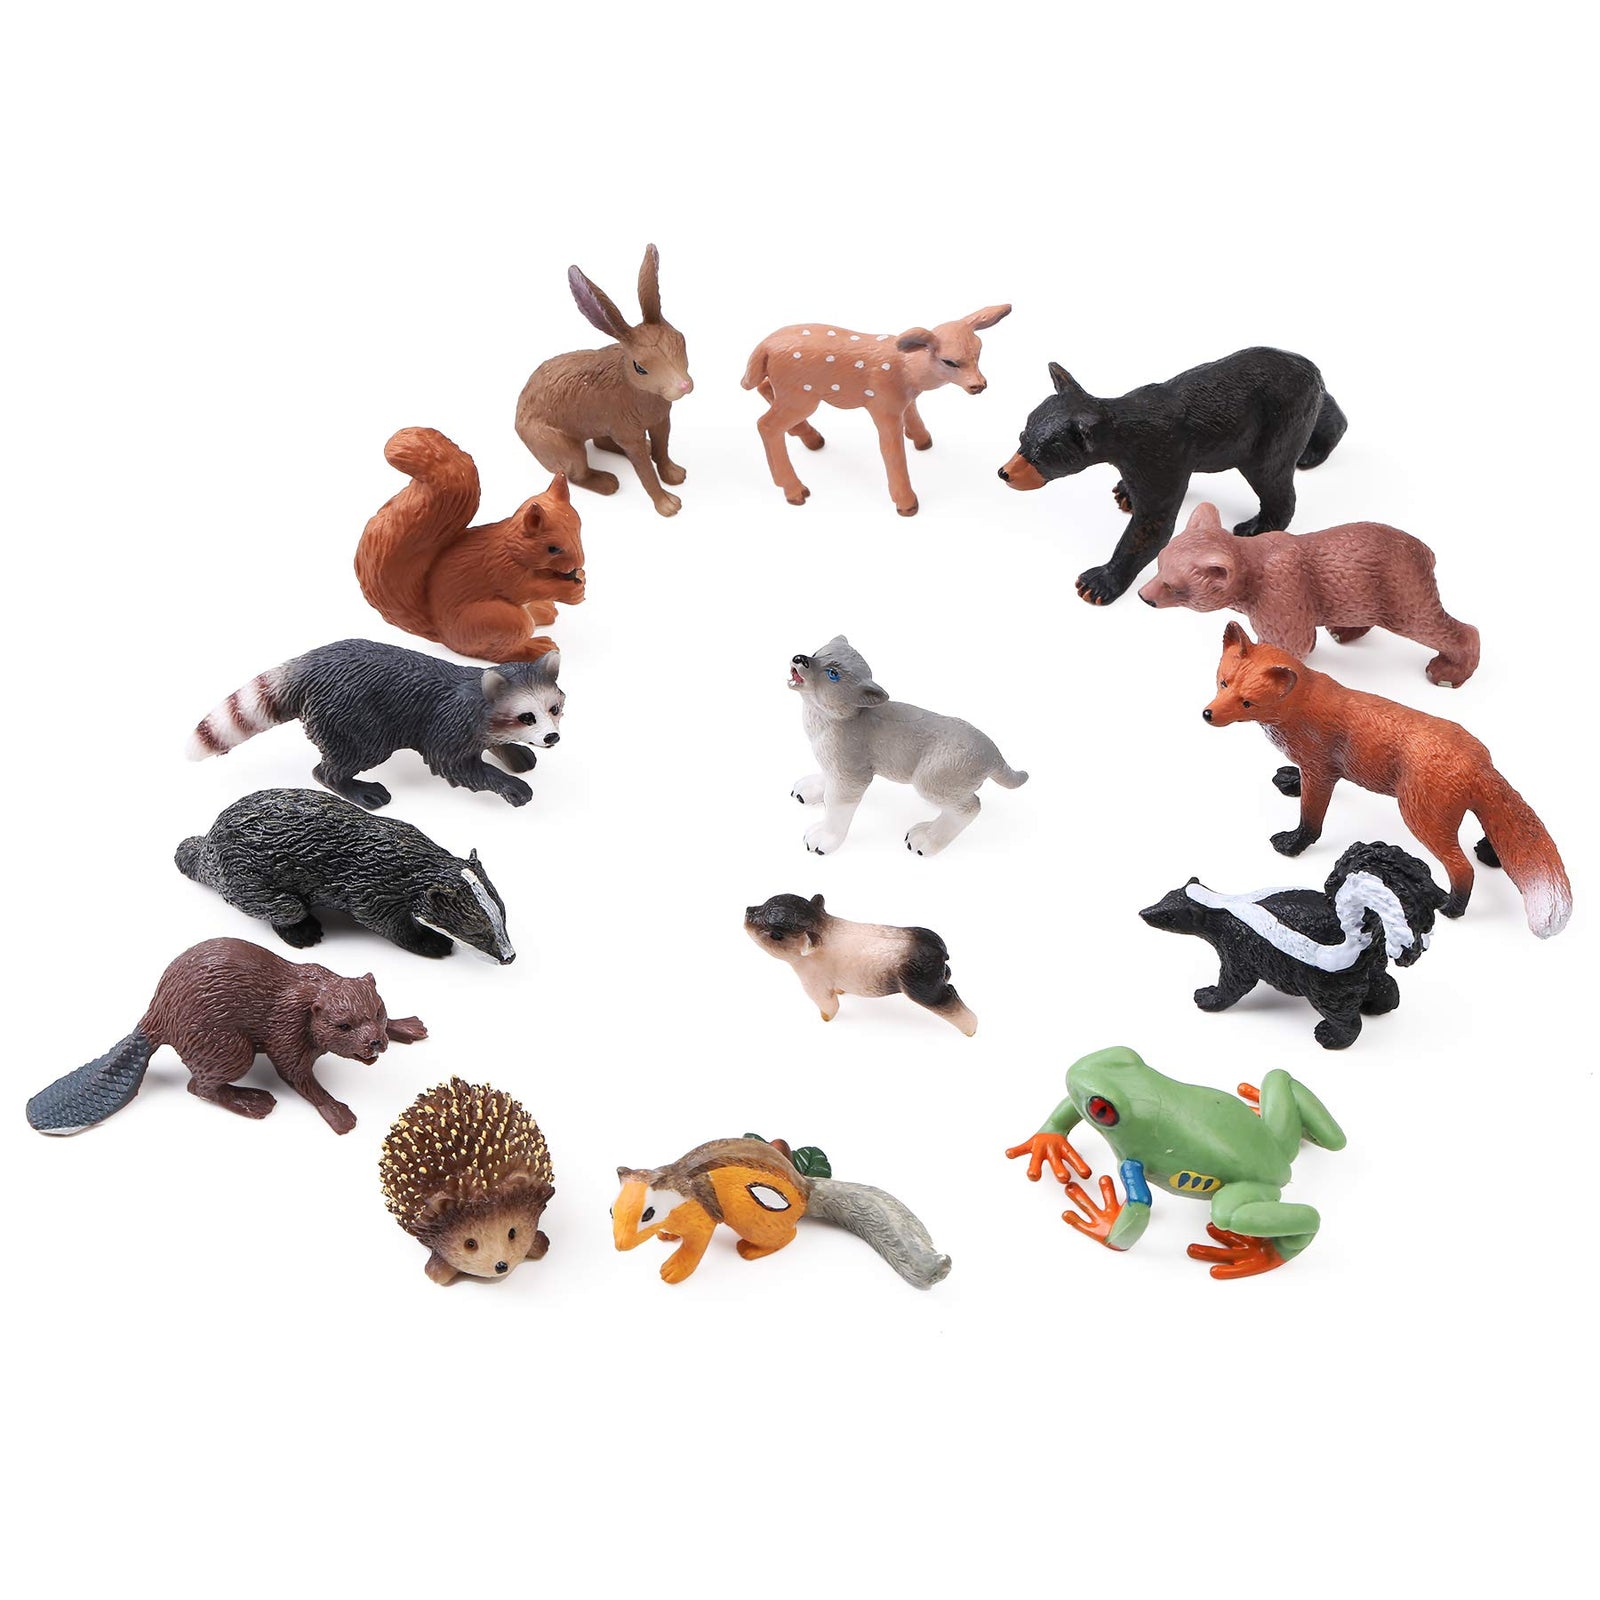 16pcs Forest Animals Baby Figures, Woodland Creatures Figurines, Miniature Toys Cake Toppers Cupcake Toppers Birthday Gift for Kids